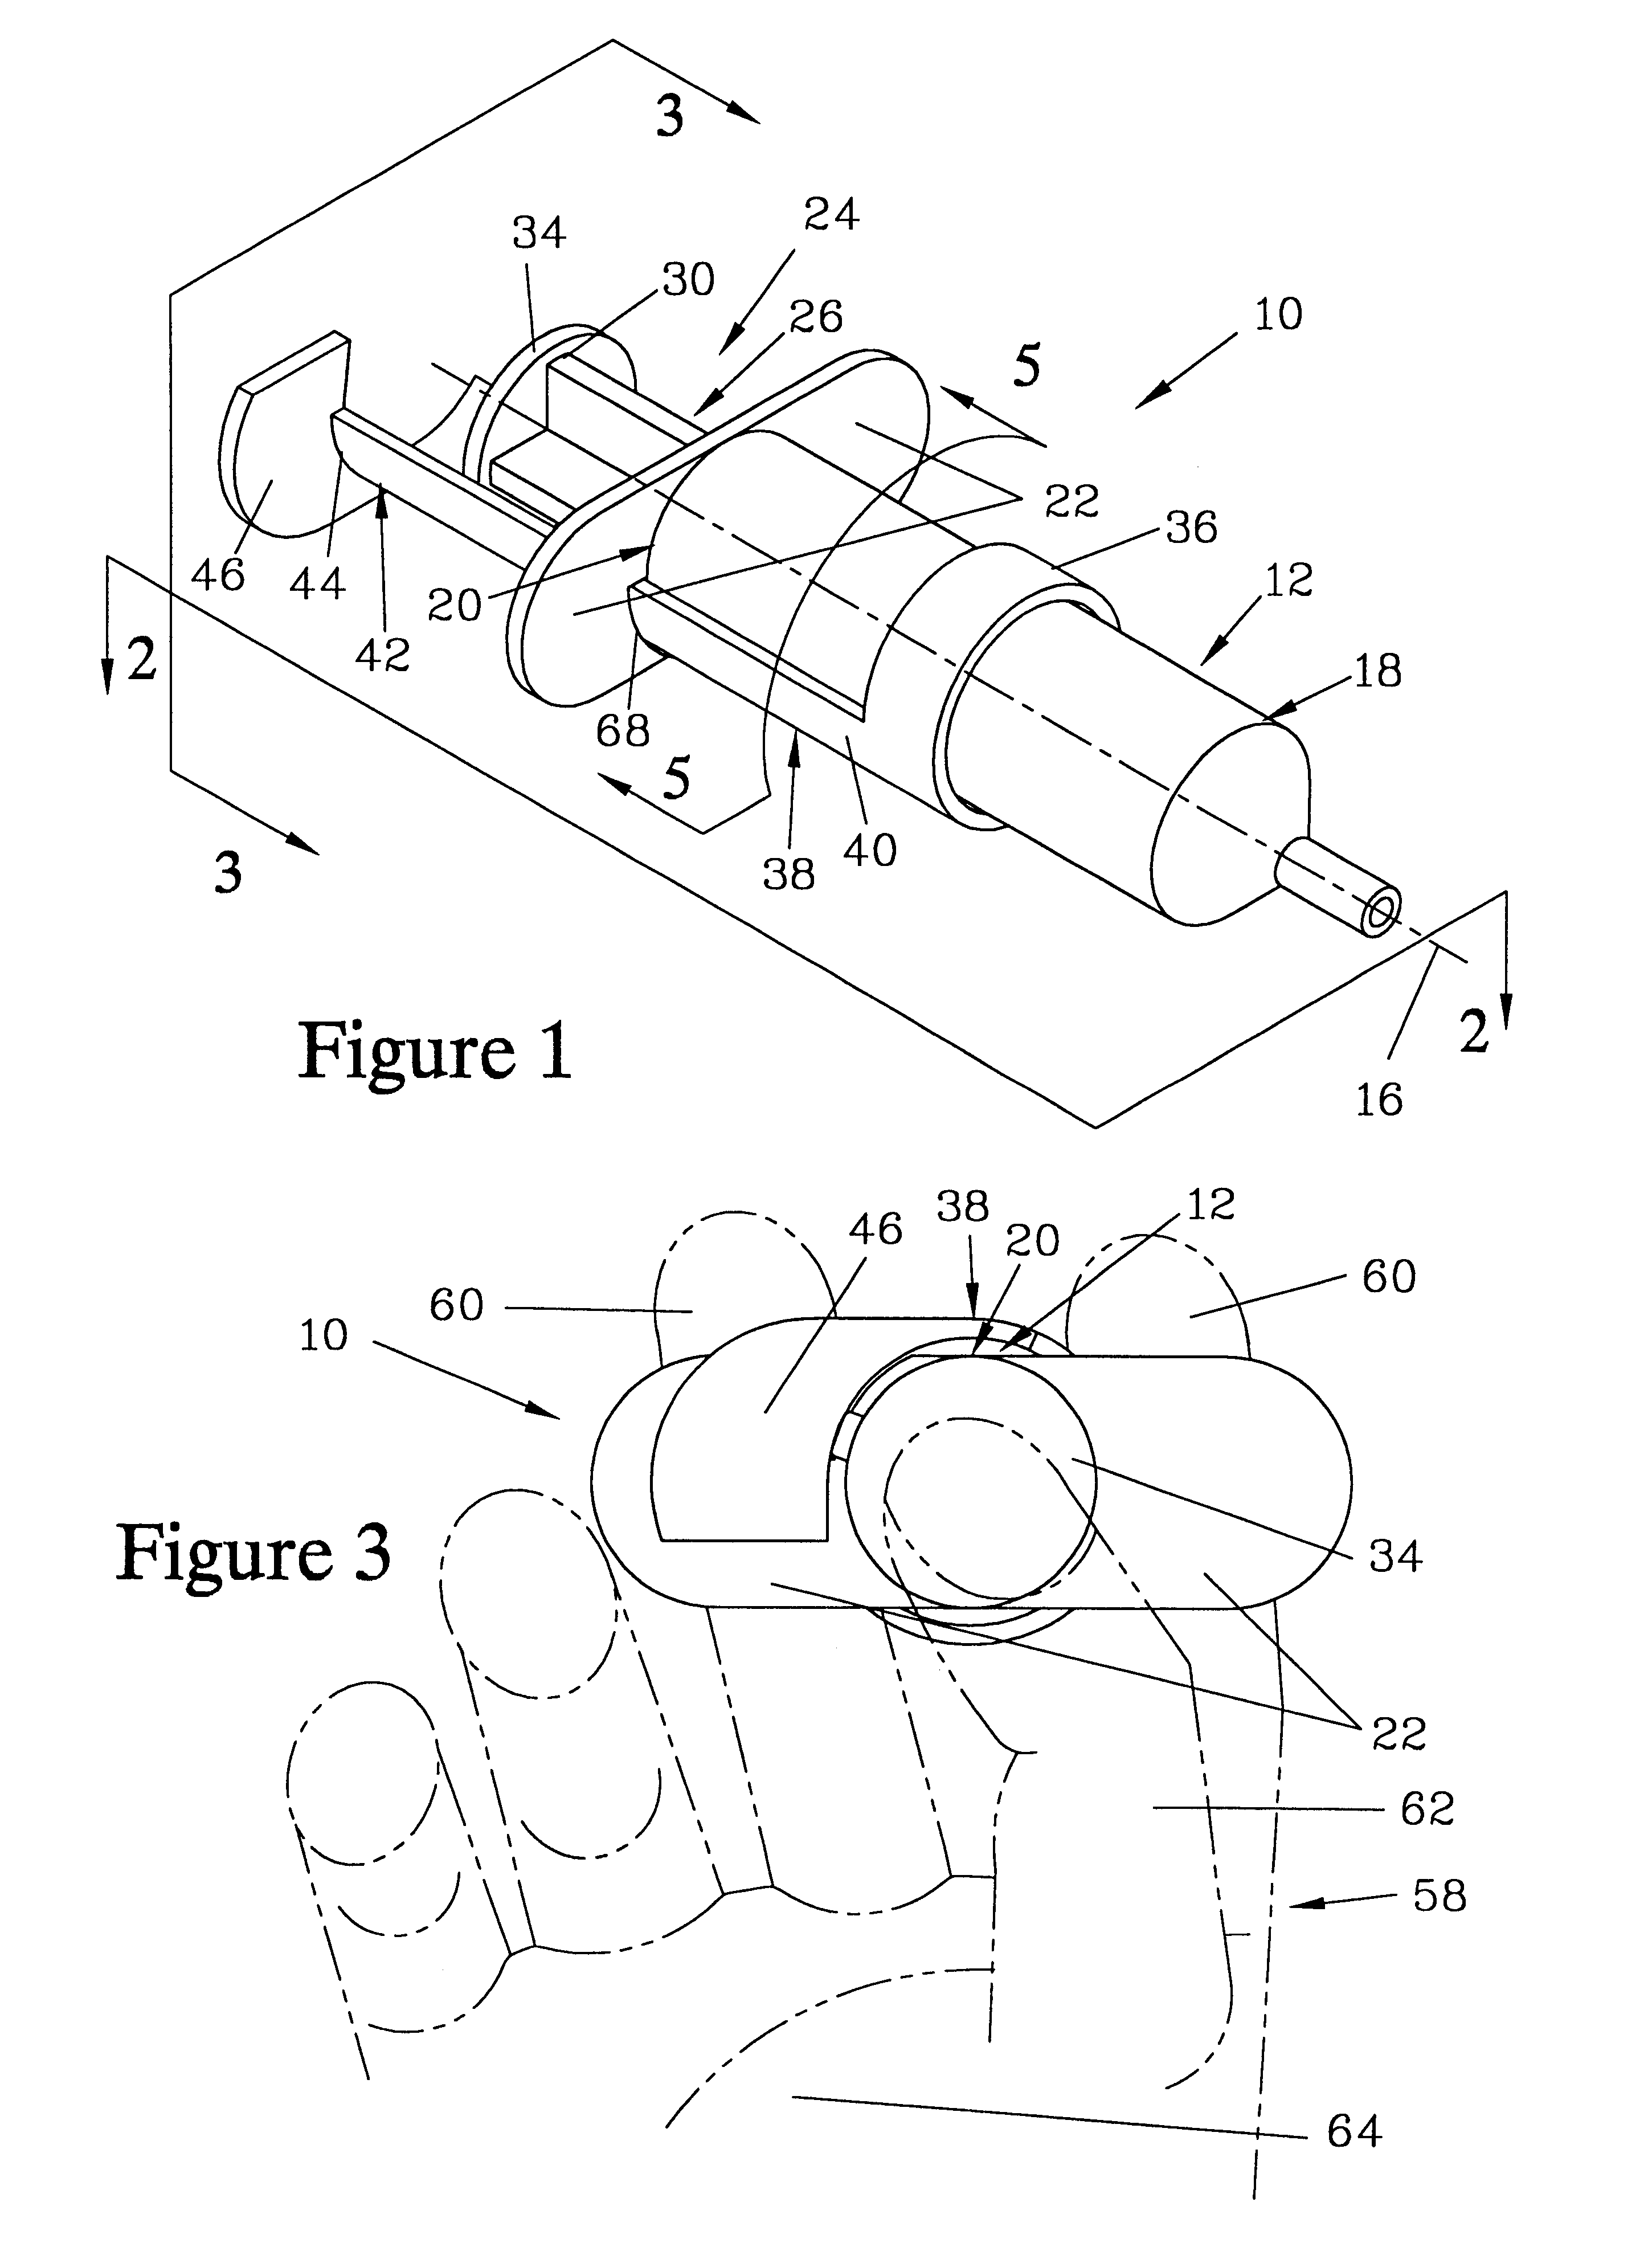 One-handed single grip position aspiration and injection syringe